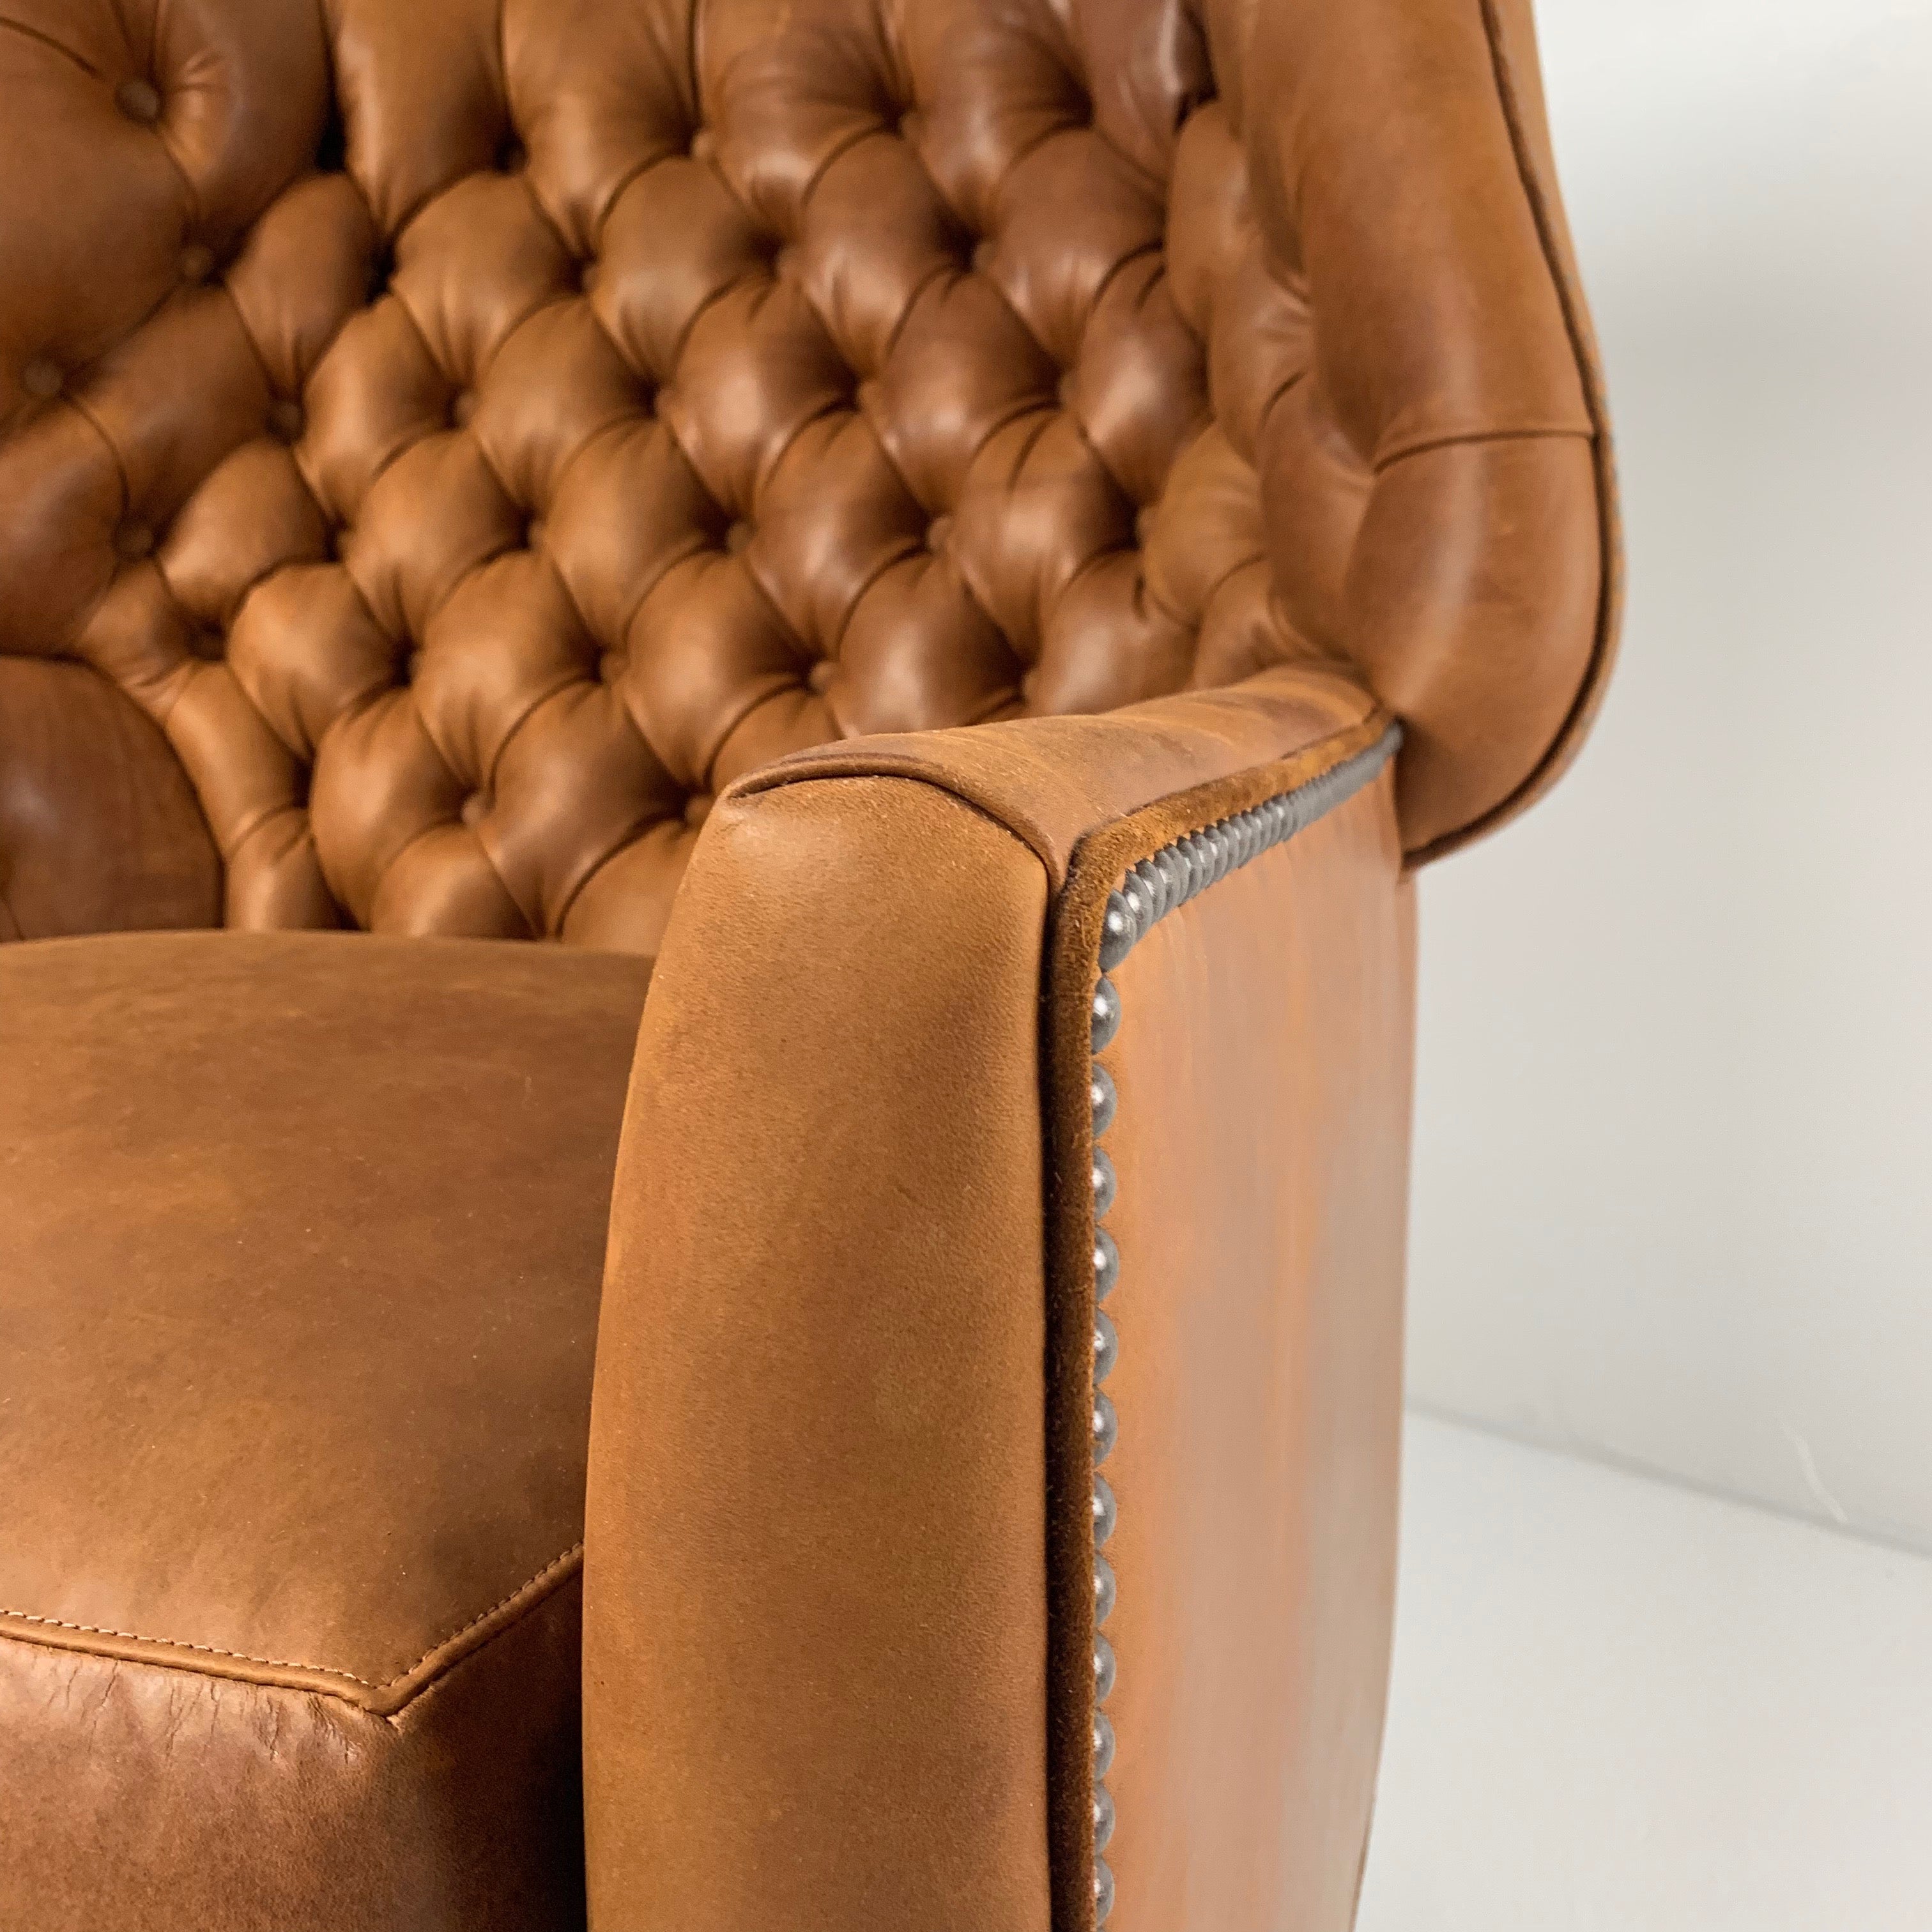 Webster Leather Chair by Wesley Hall shown in Sheridan Nutmeg leather - close up arm